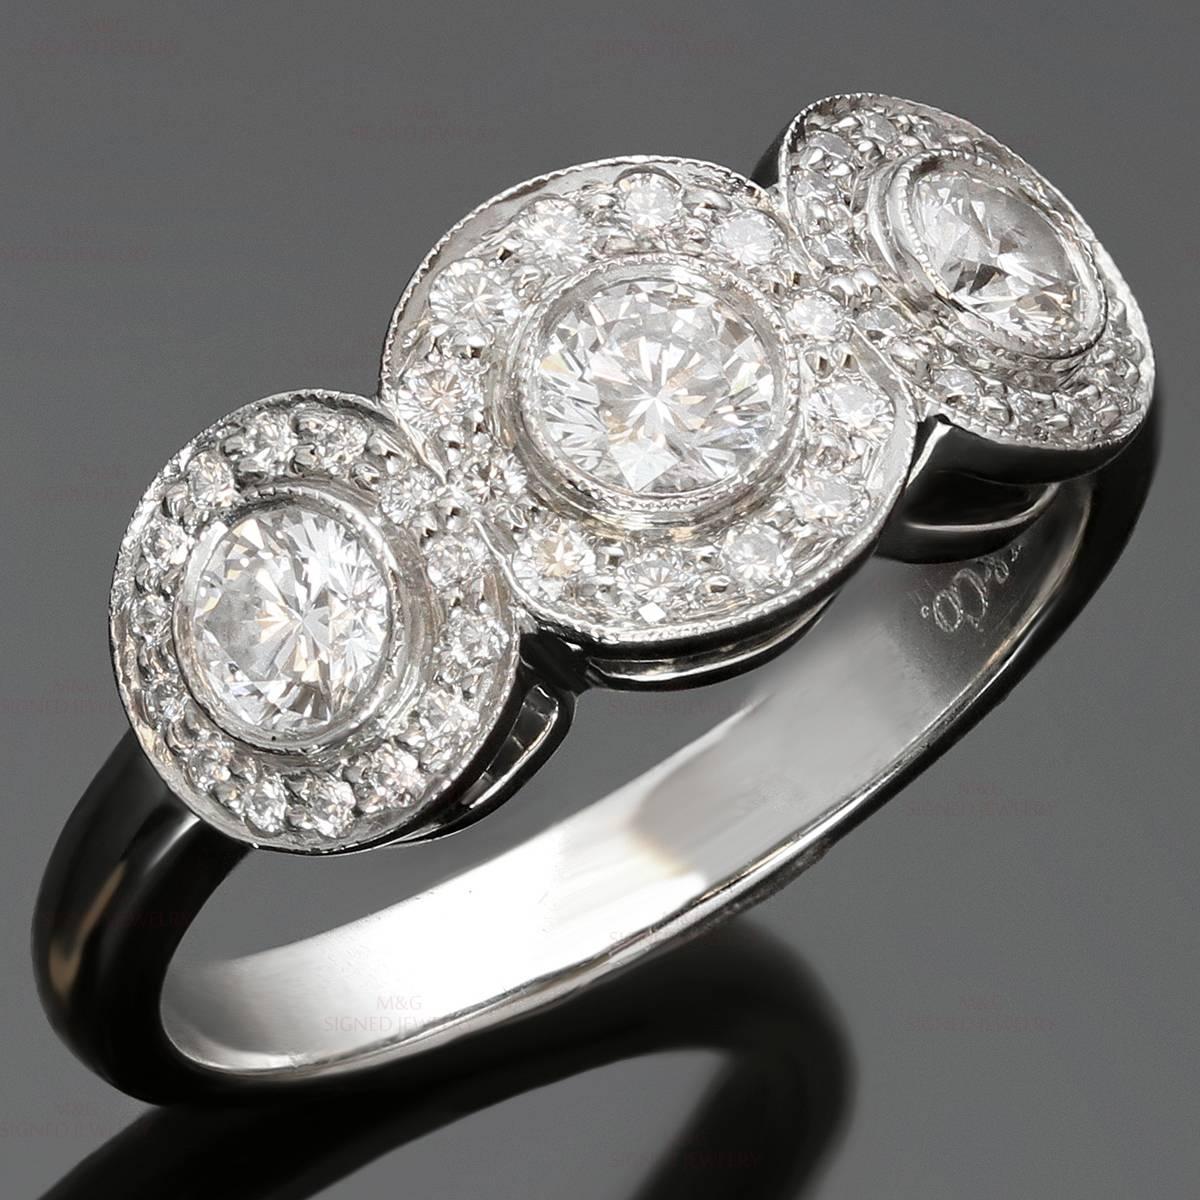 This stunning Tiffany three-stone ring from the classic Circlet collection is crafted in fine platinum and set with brilliant-cut round diamonds of an estimated 0.55 carats. Elegant and timeless. Made in United States circa 2010s. Measurements: